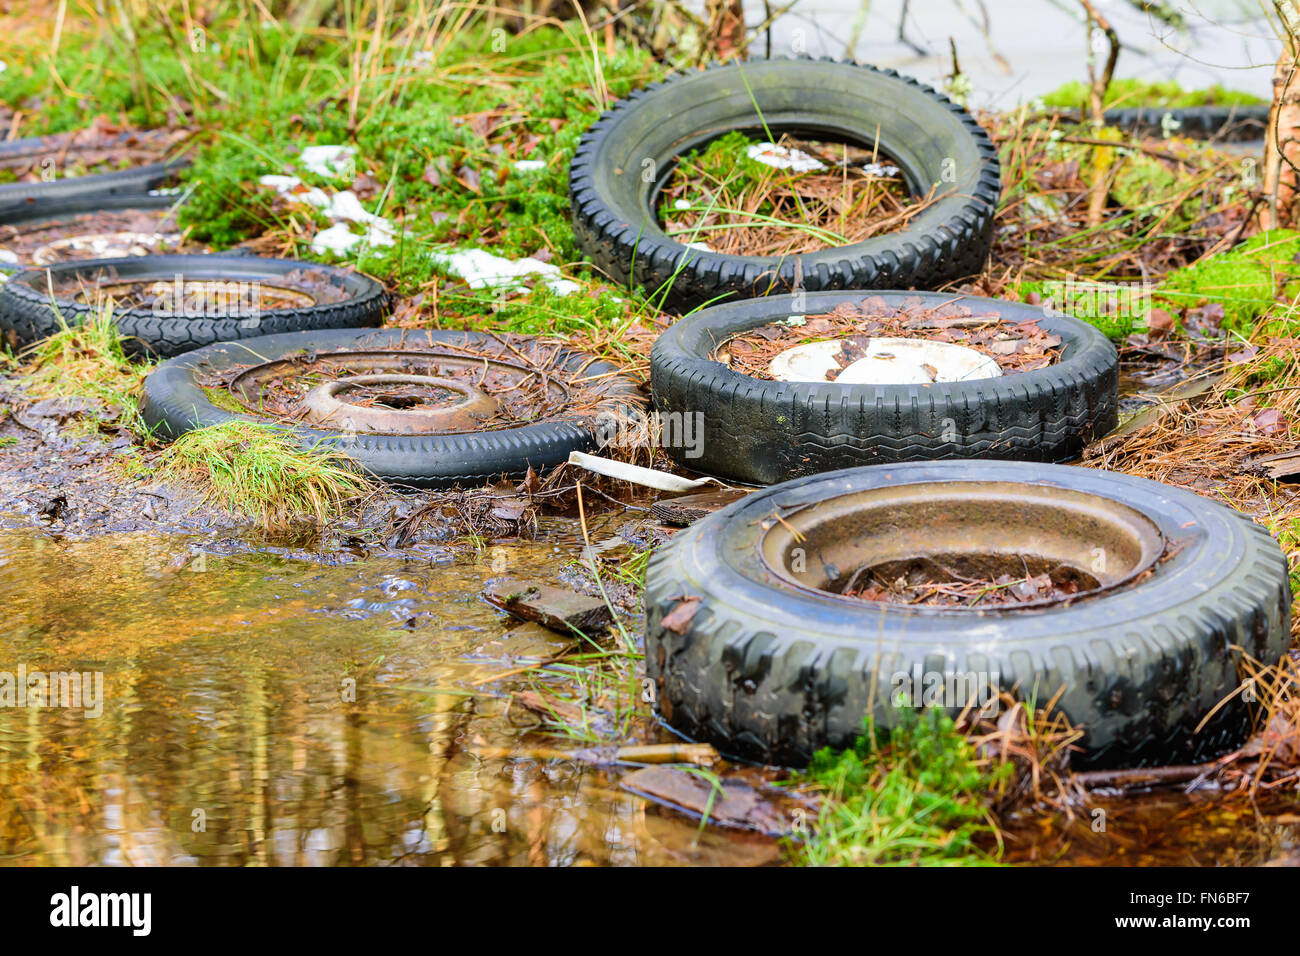 A bunch of used old car tires left in nature to degrade and pollute the environment. The ground is wet and a water puddle is vis Stock Photo